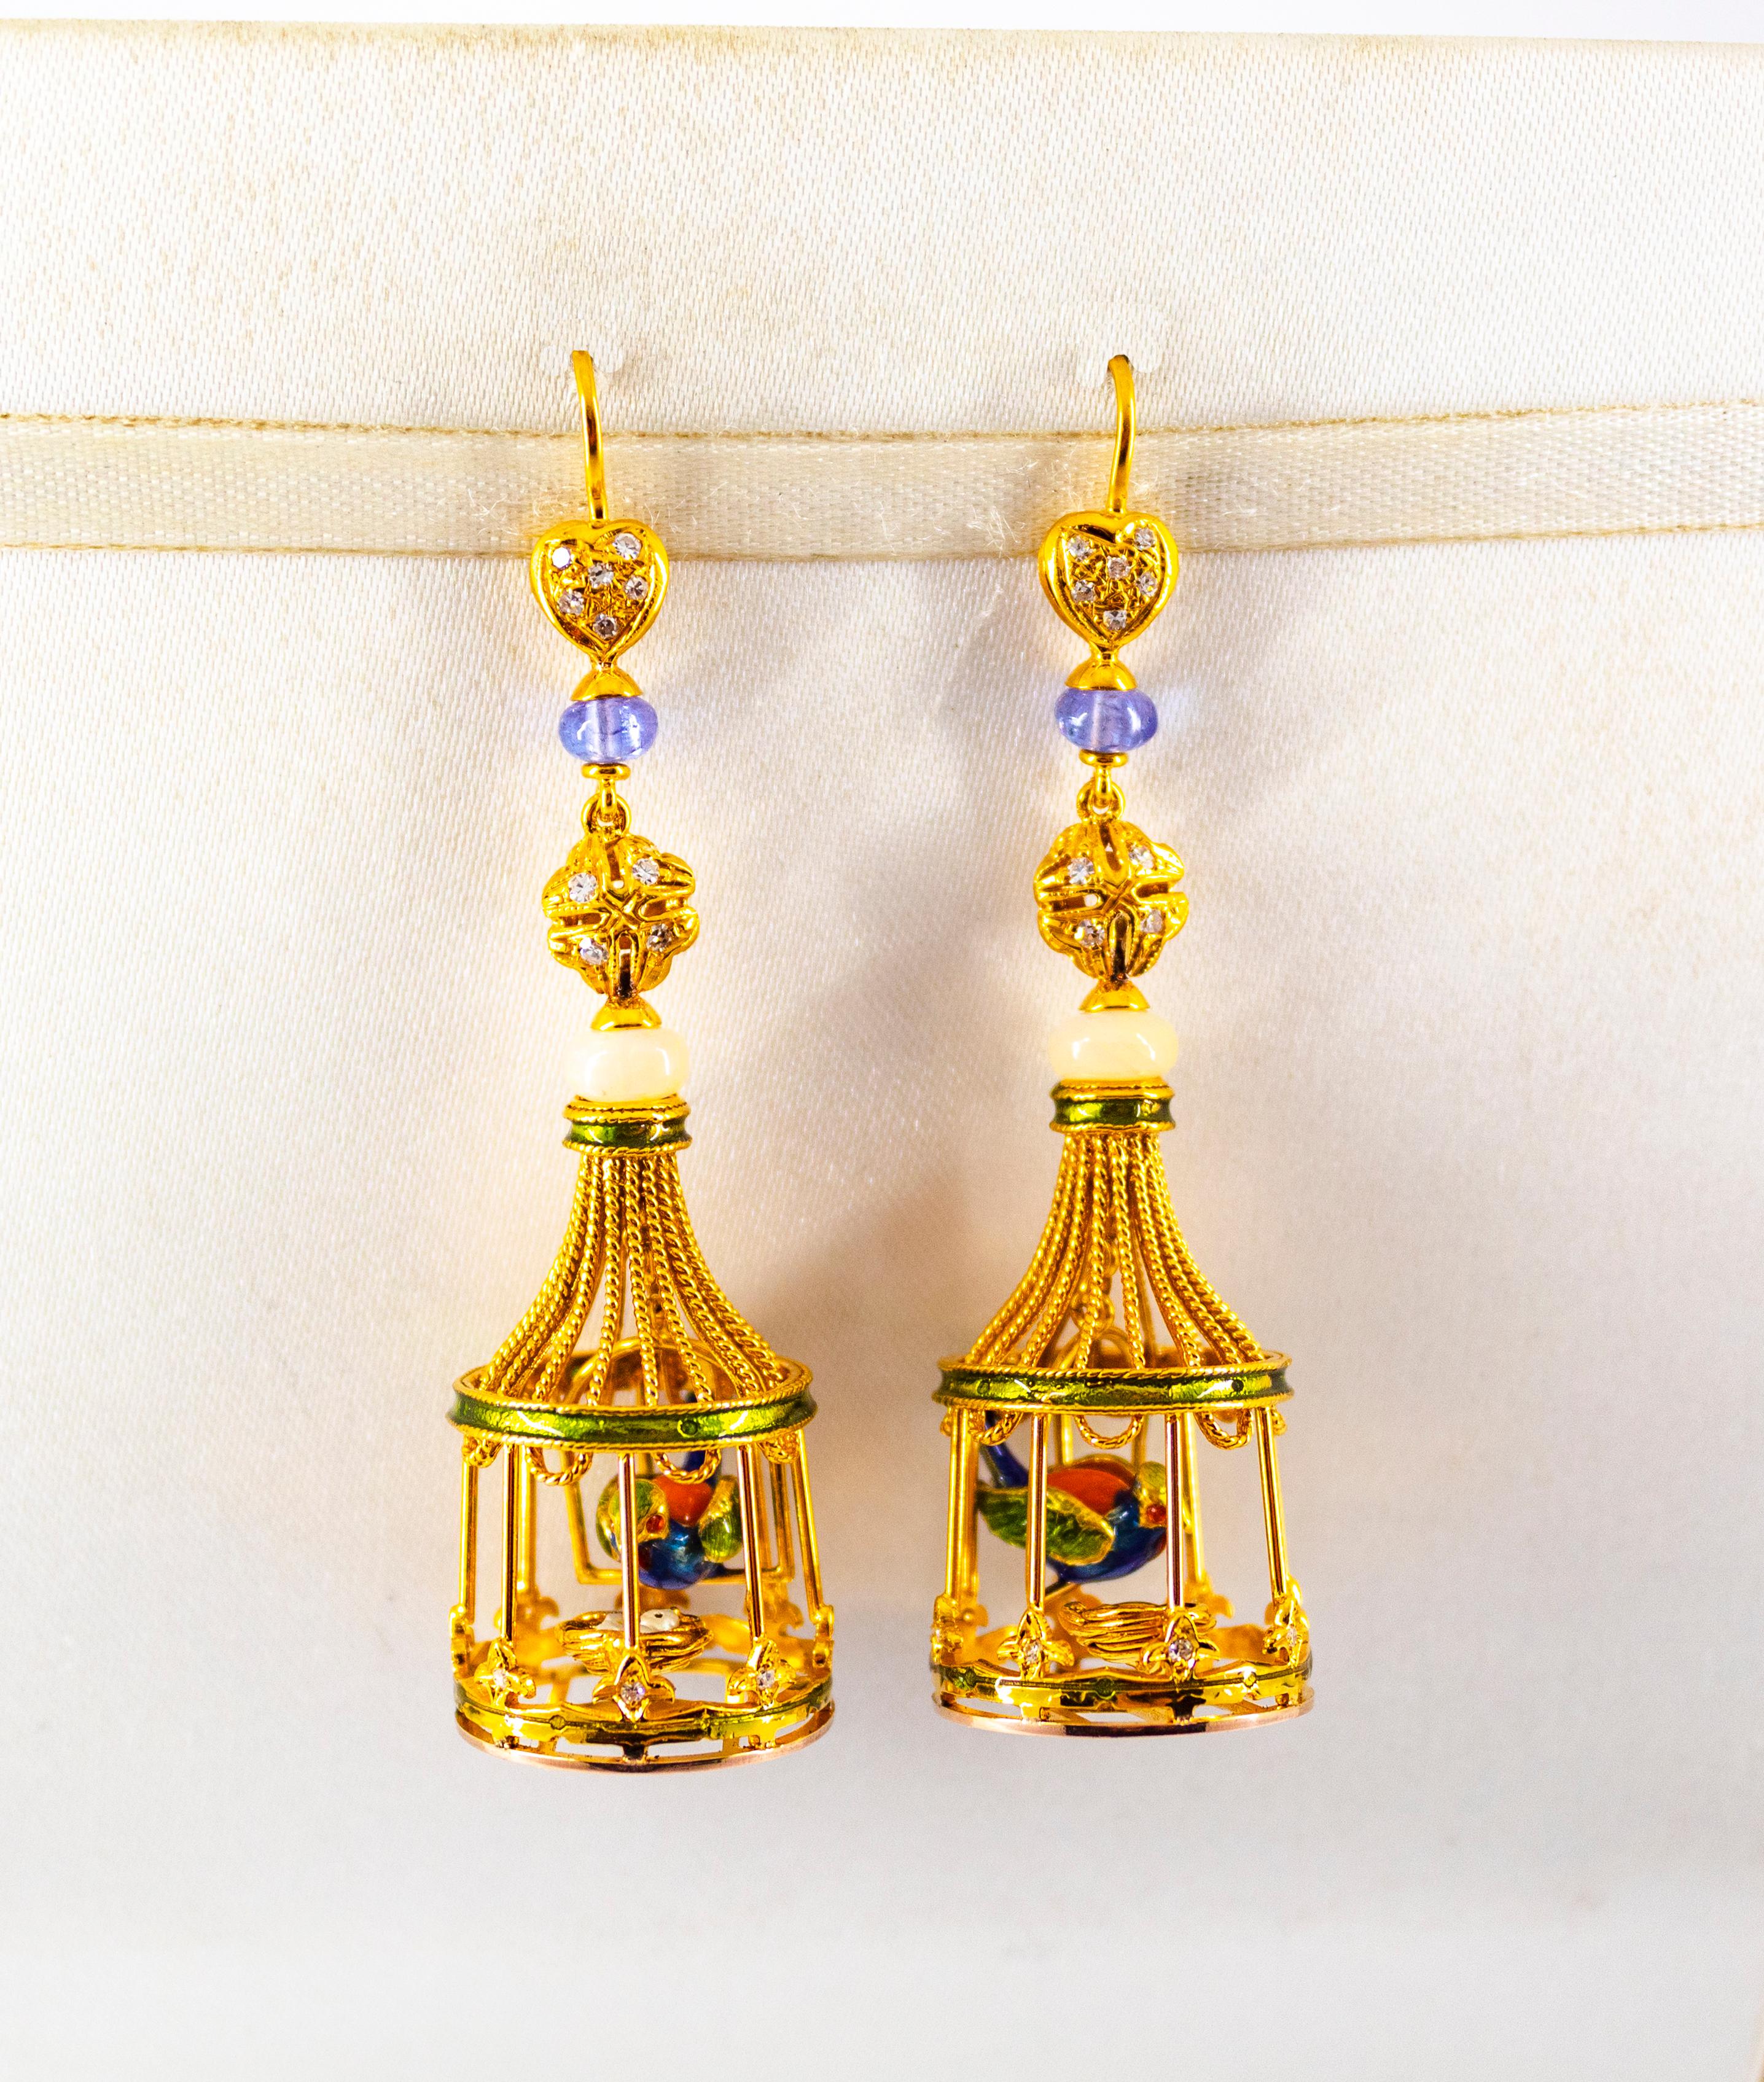 These Stud Earrings are made of 9K Yellow Gold.
These Earrings have 0.40 Carats of White Diamonds.
These Earrings have Opal and Tanzanite.
These Earrings have also Mediterranean (Sardinia, Italy) Red Coral, Enamel and Pearls.
All our Earrings have